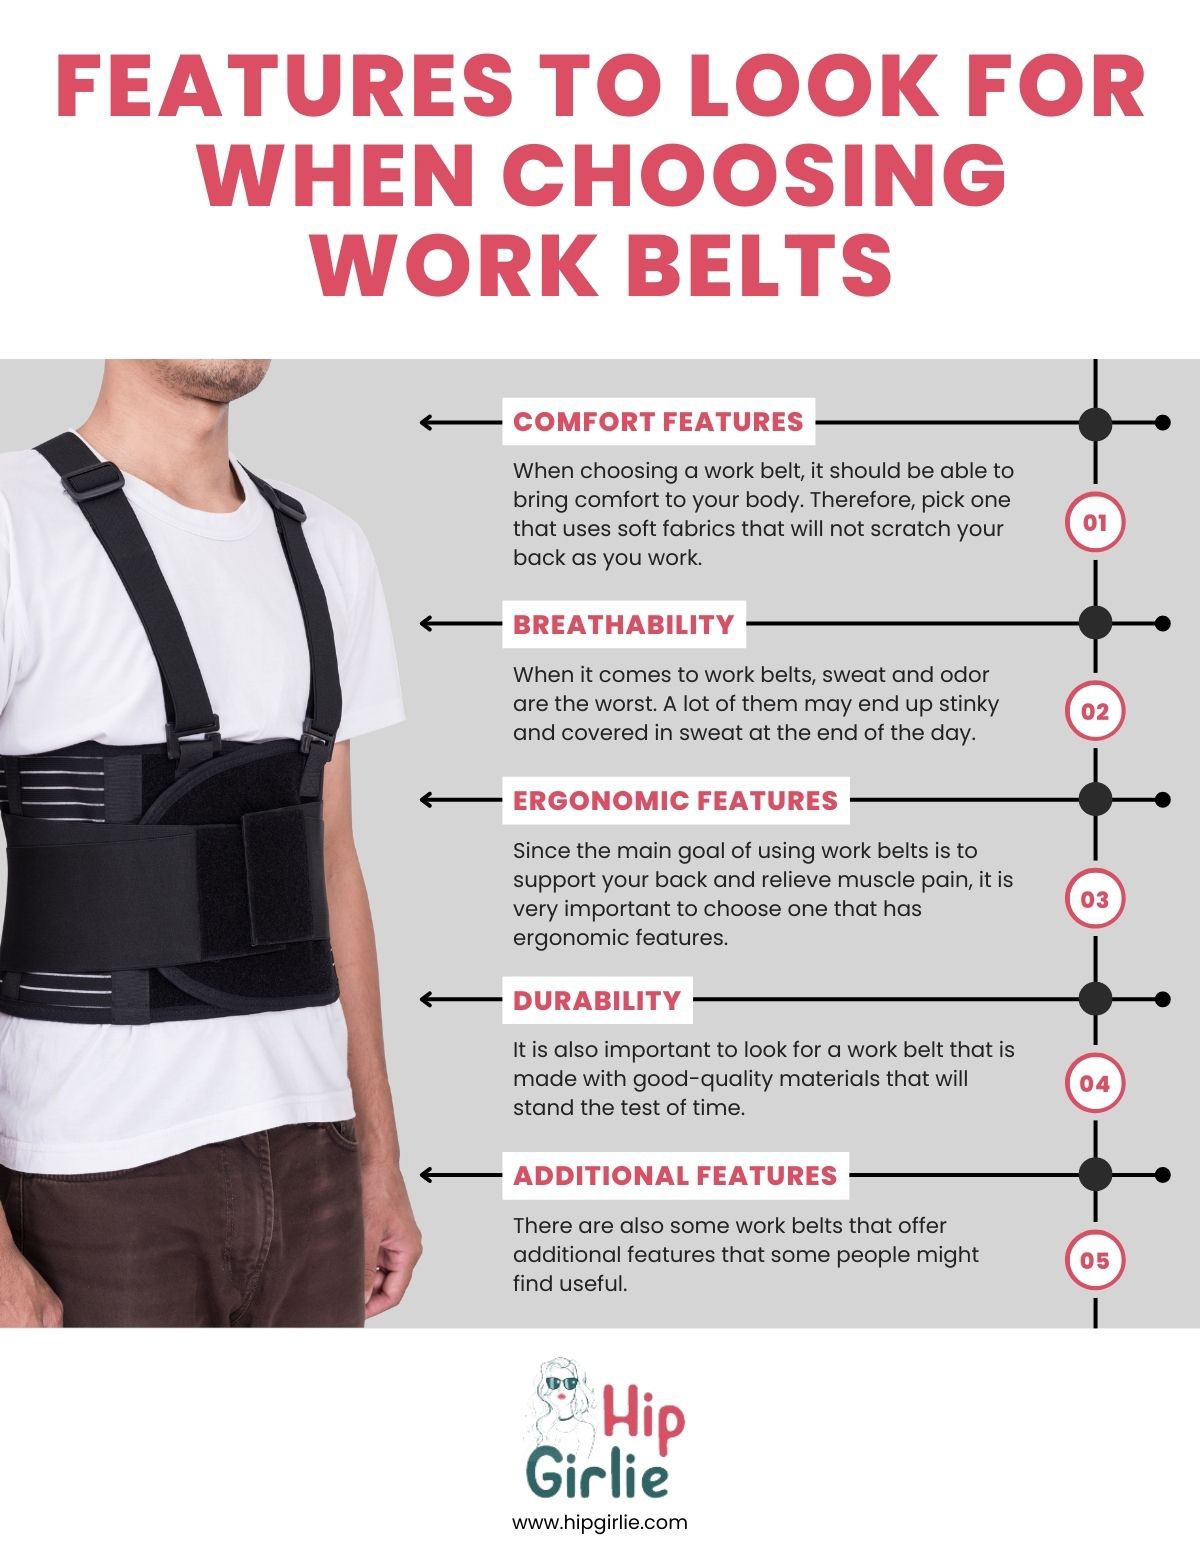 Features-to-Look-For-When-Choosing-Work-Belts